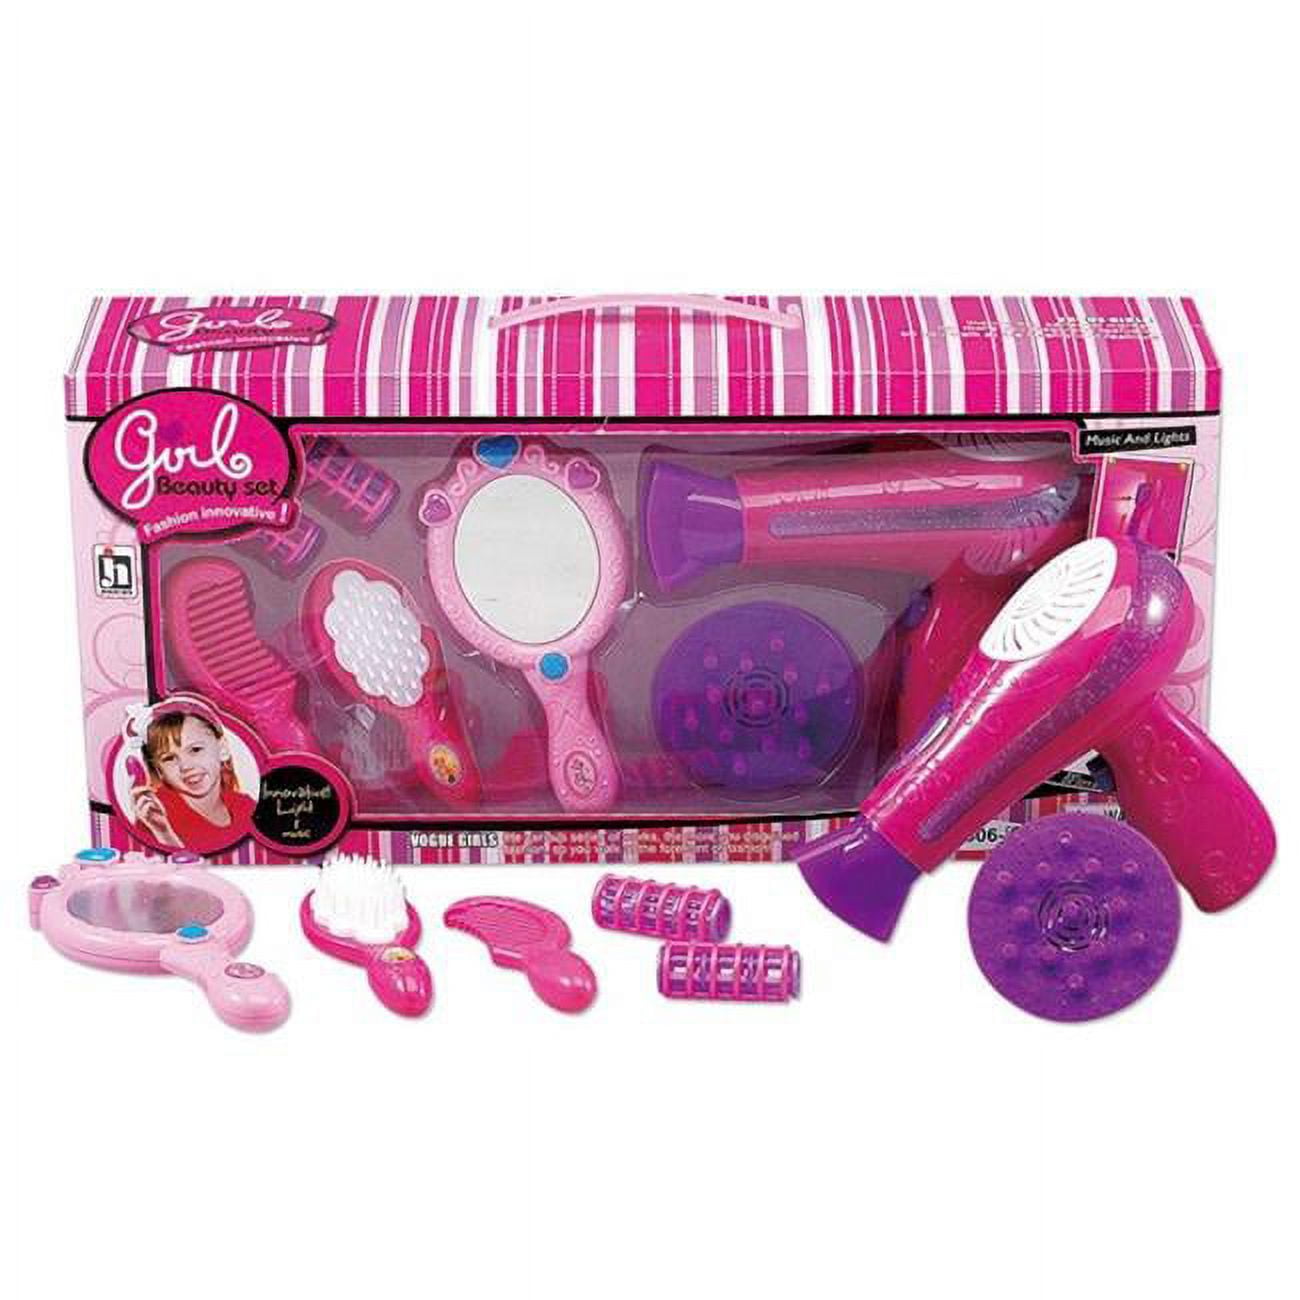 Ps08069 Beauty Salon Fashion Play Set With Hairdryer, Mirror & Accessories